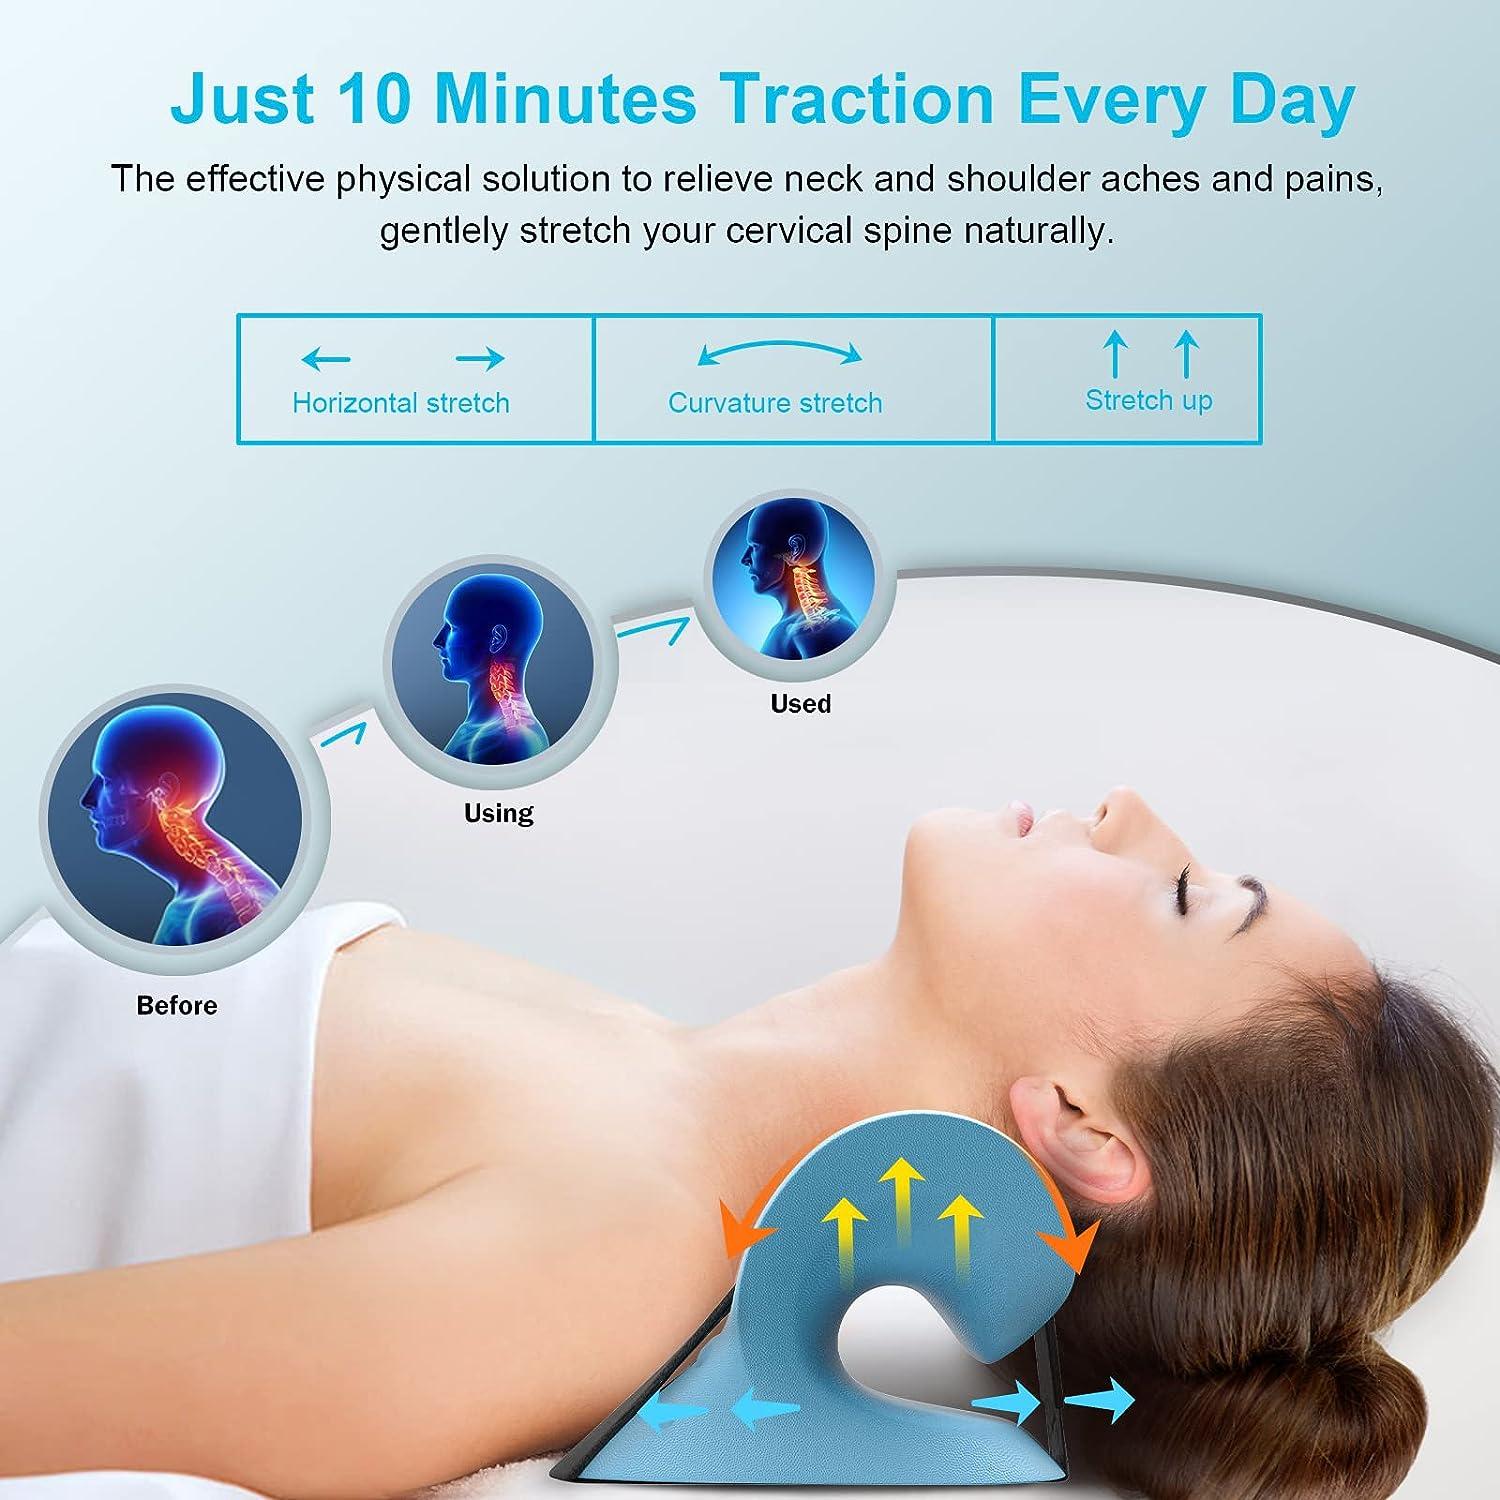 Fast Heated Neck Stretcher for Pain Relief, Neck Cloud Cervical Traction  Device with Graphene Heating Pad, Lanieney Neck and Shoulder Relaxer for  TMJ Headache Pain Relief and Spine Alignment, No Smell